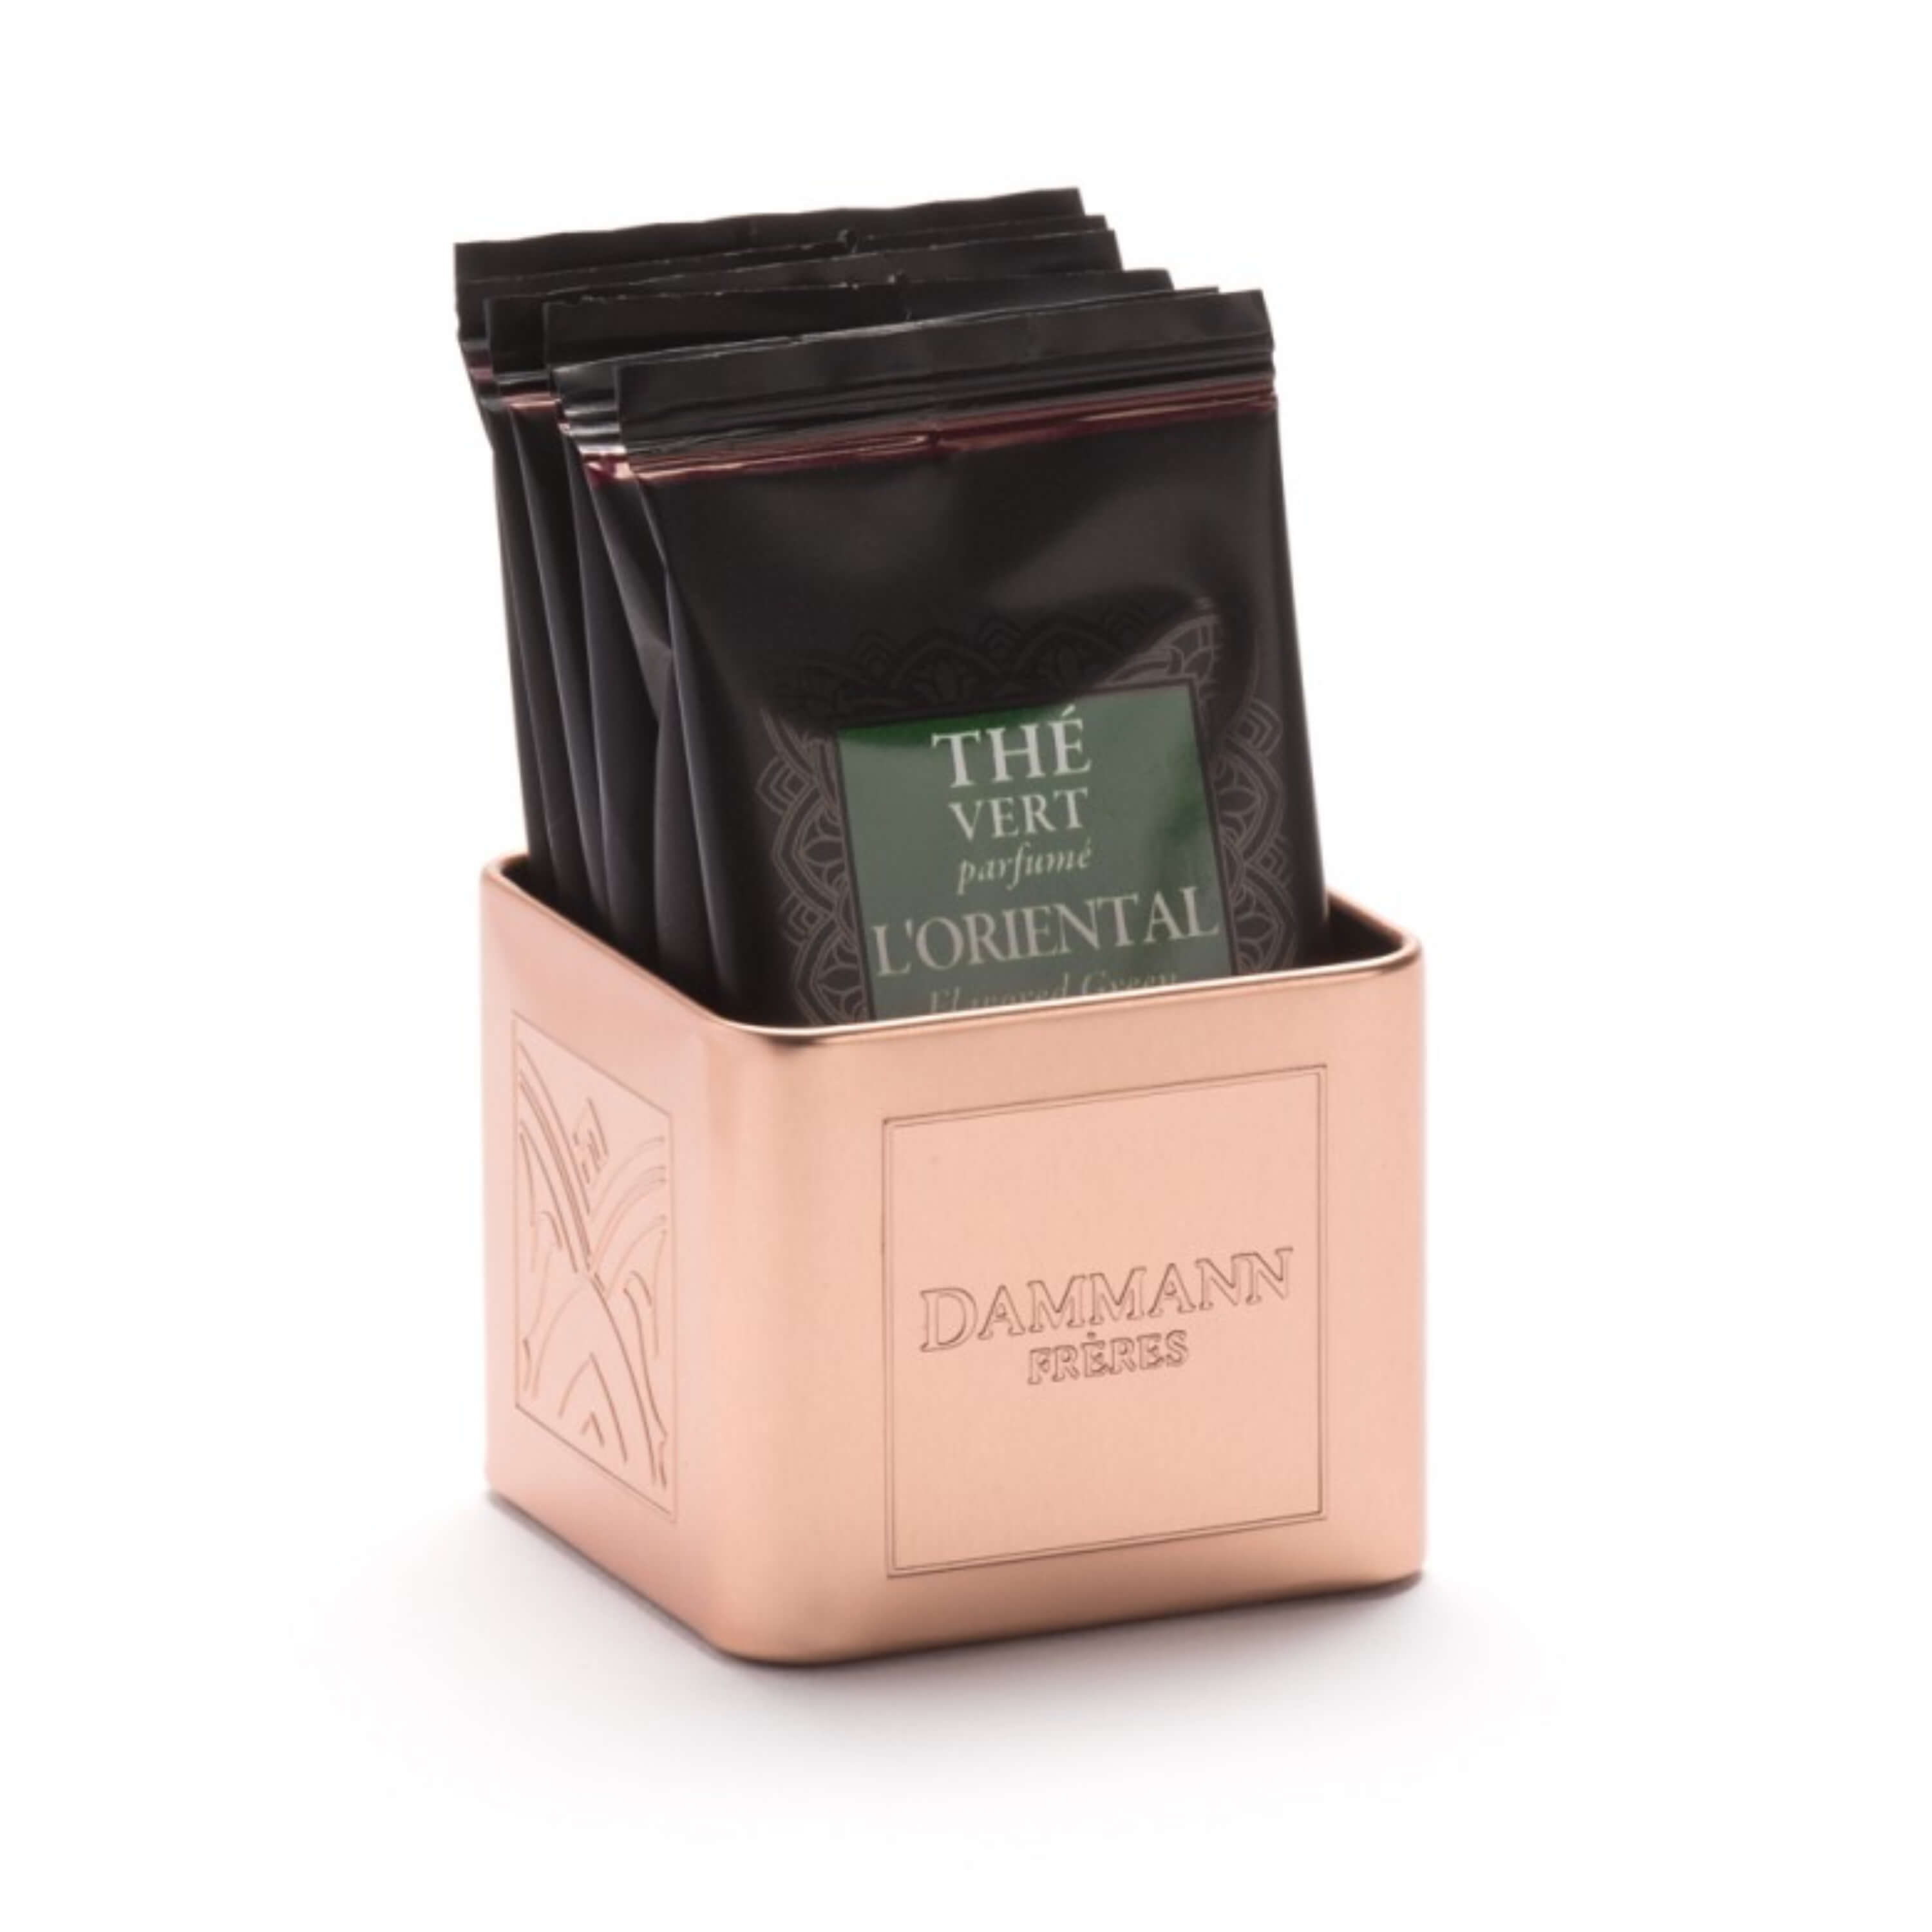 Dammann Frères Tea bag tray (up to 8 tea bags), Caddy / Container, 18-20-1812